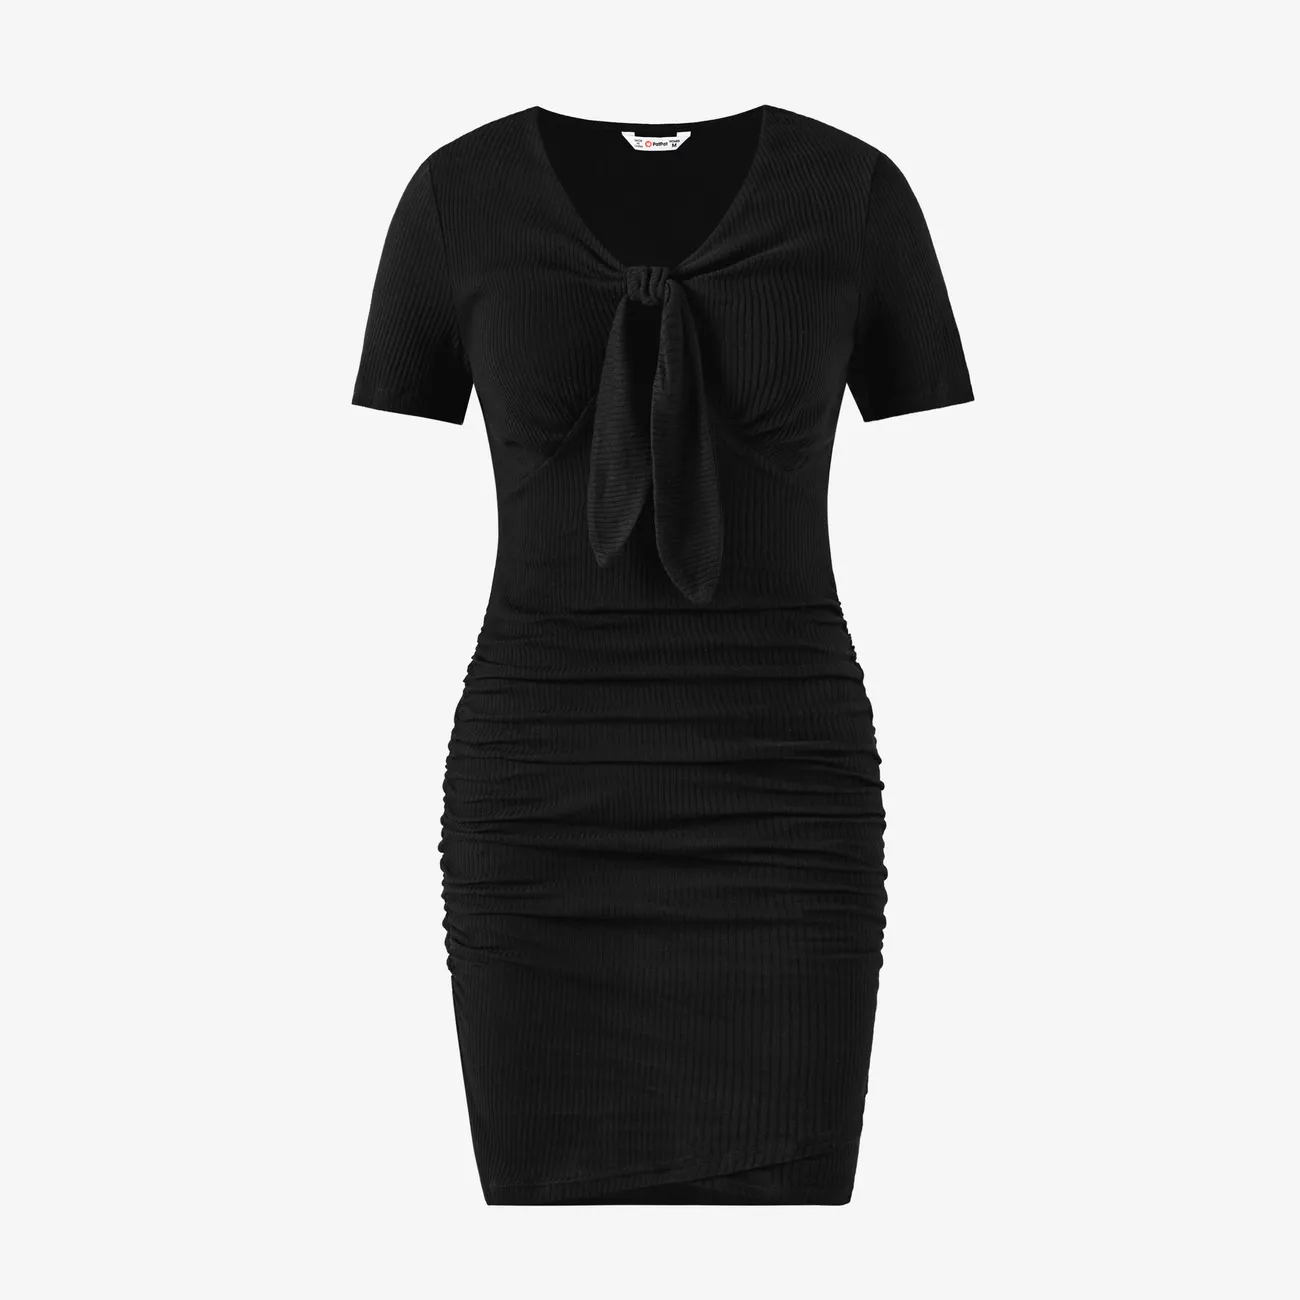 Mommy and Me Short-Sleeve Black Ribbed Tie Neck Ruched Bodycon Dress Black big image 1